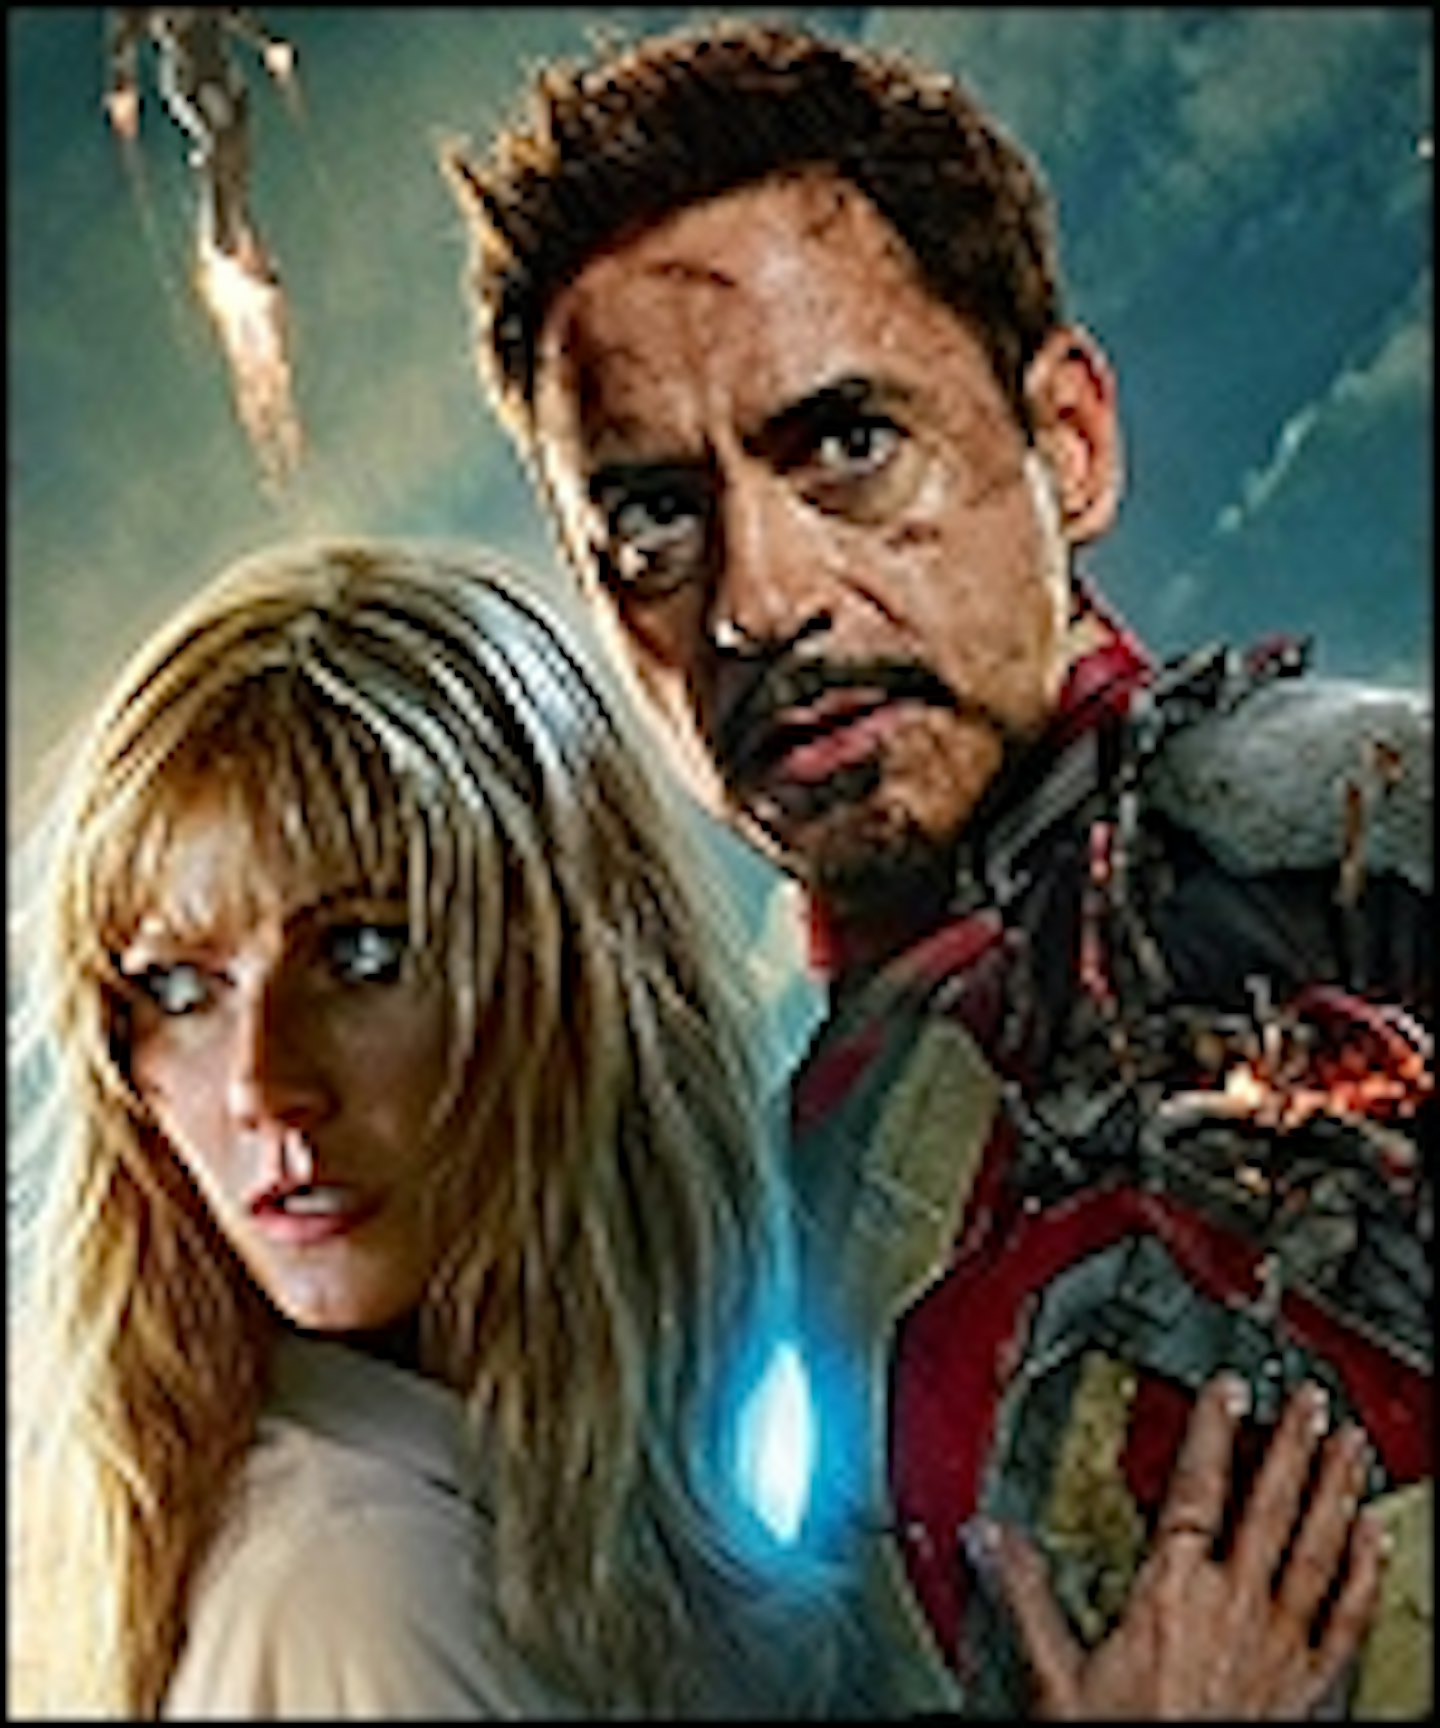 New Iron Man 3 Montage Poster Lands